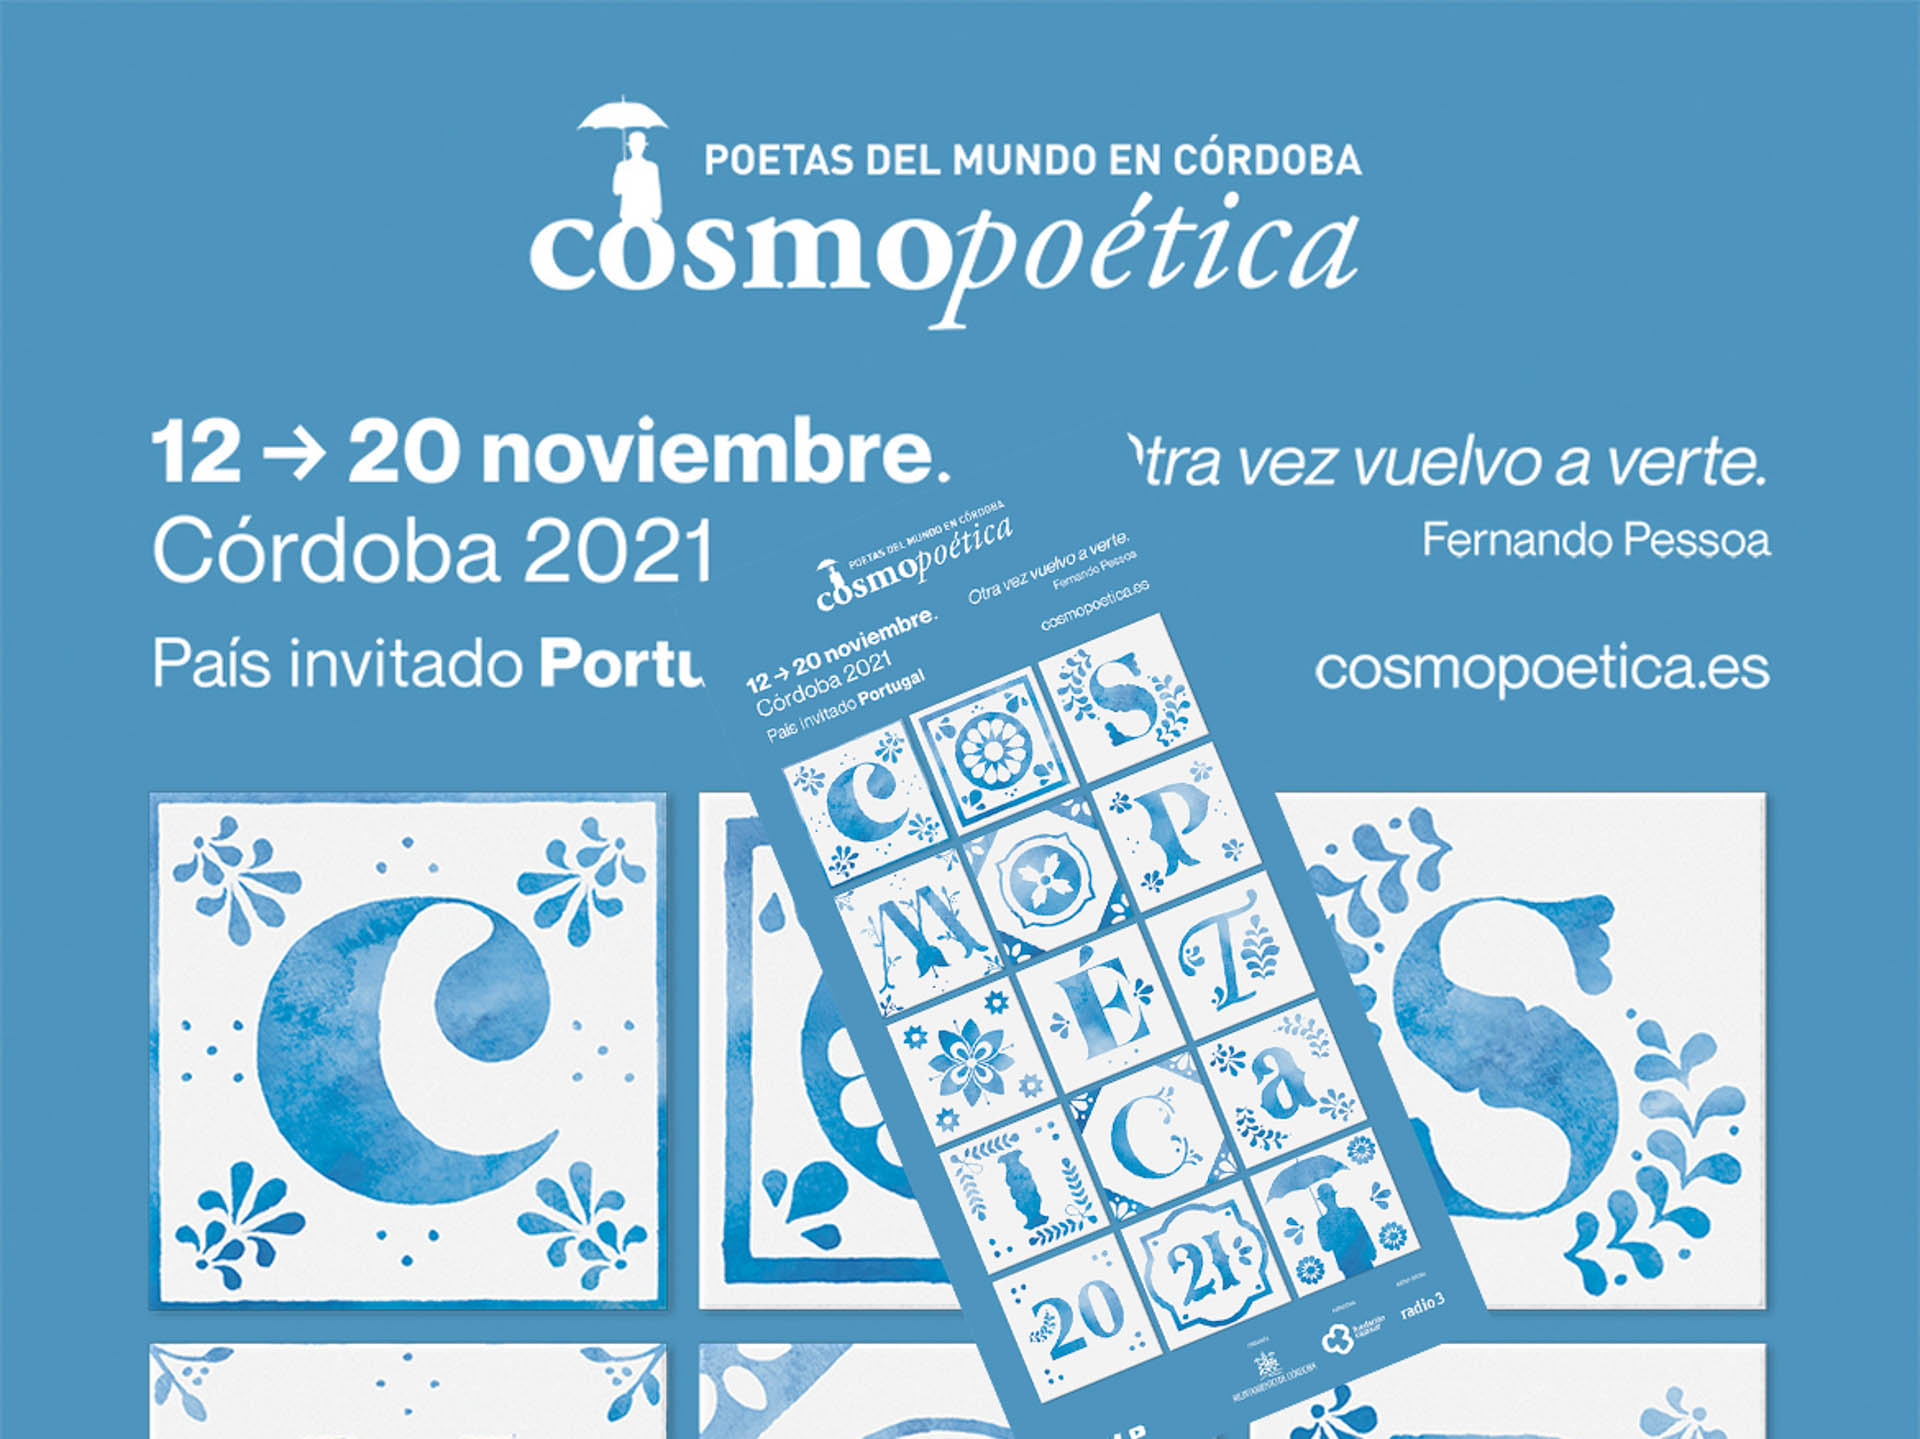 An annual festival, a metaphor for the poetic nature of the city of Córdoba